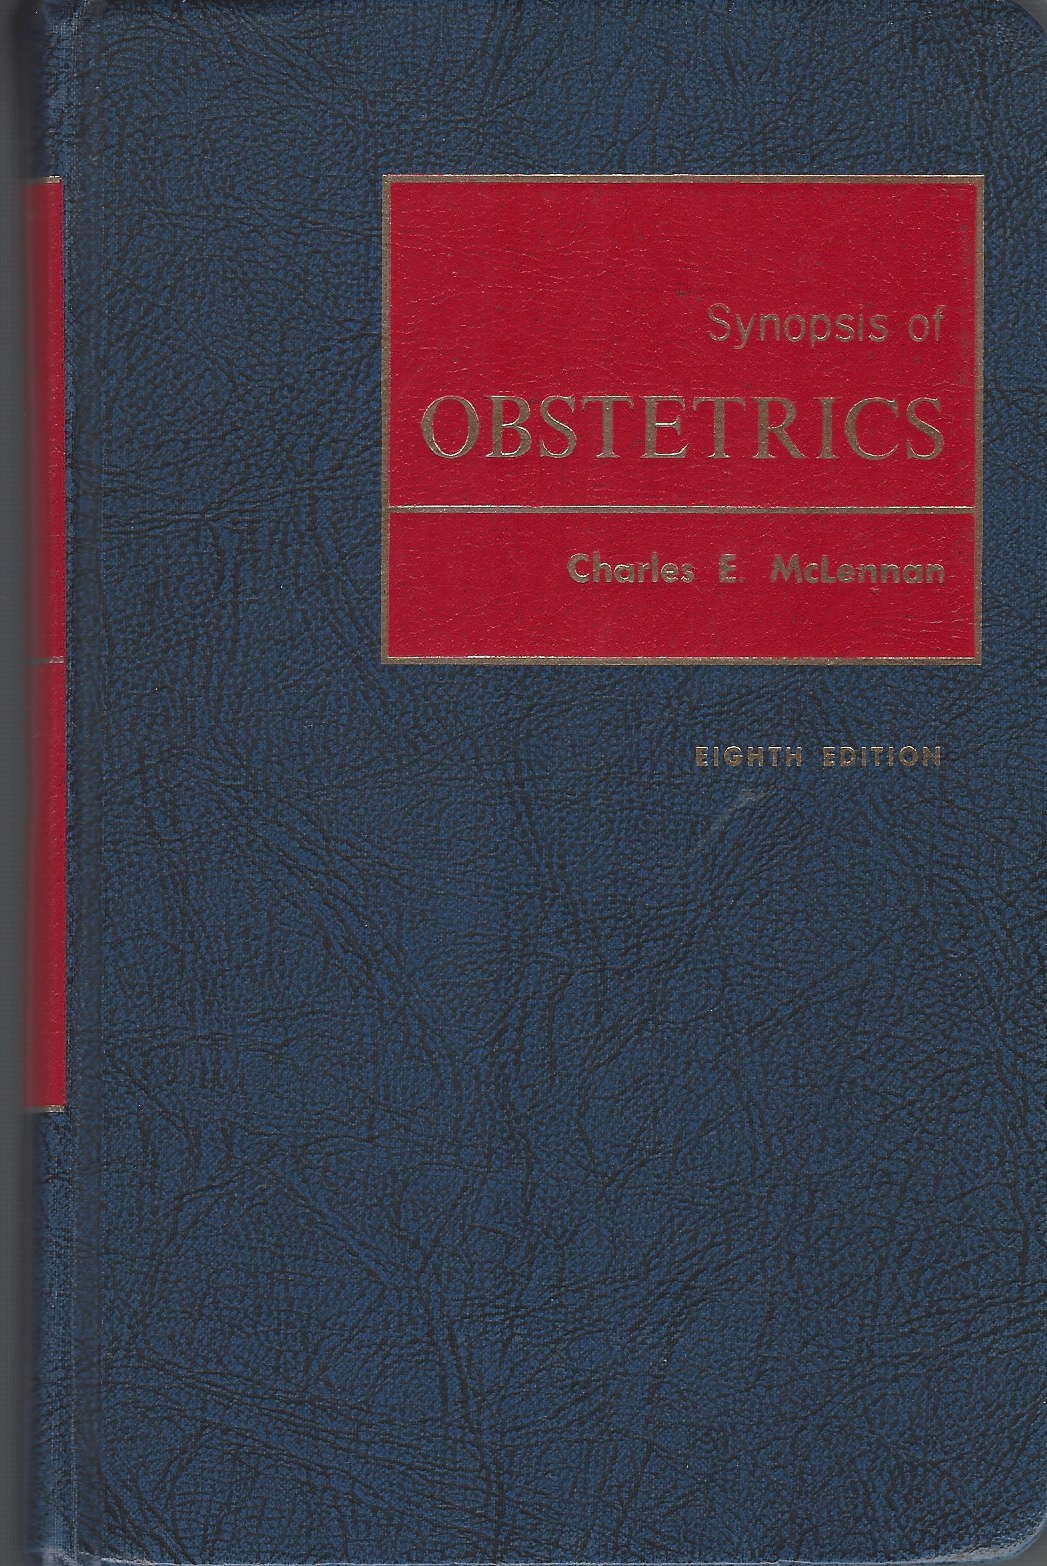 MCLENNAN CHARLES E. - Synopsis of Obstetrics